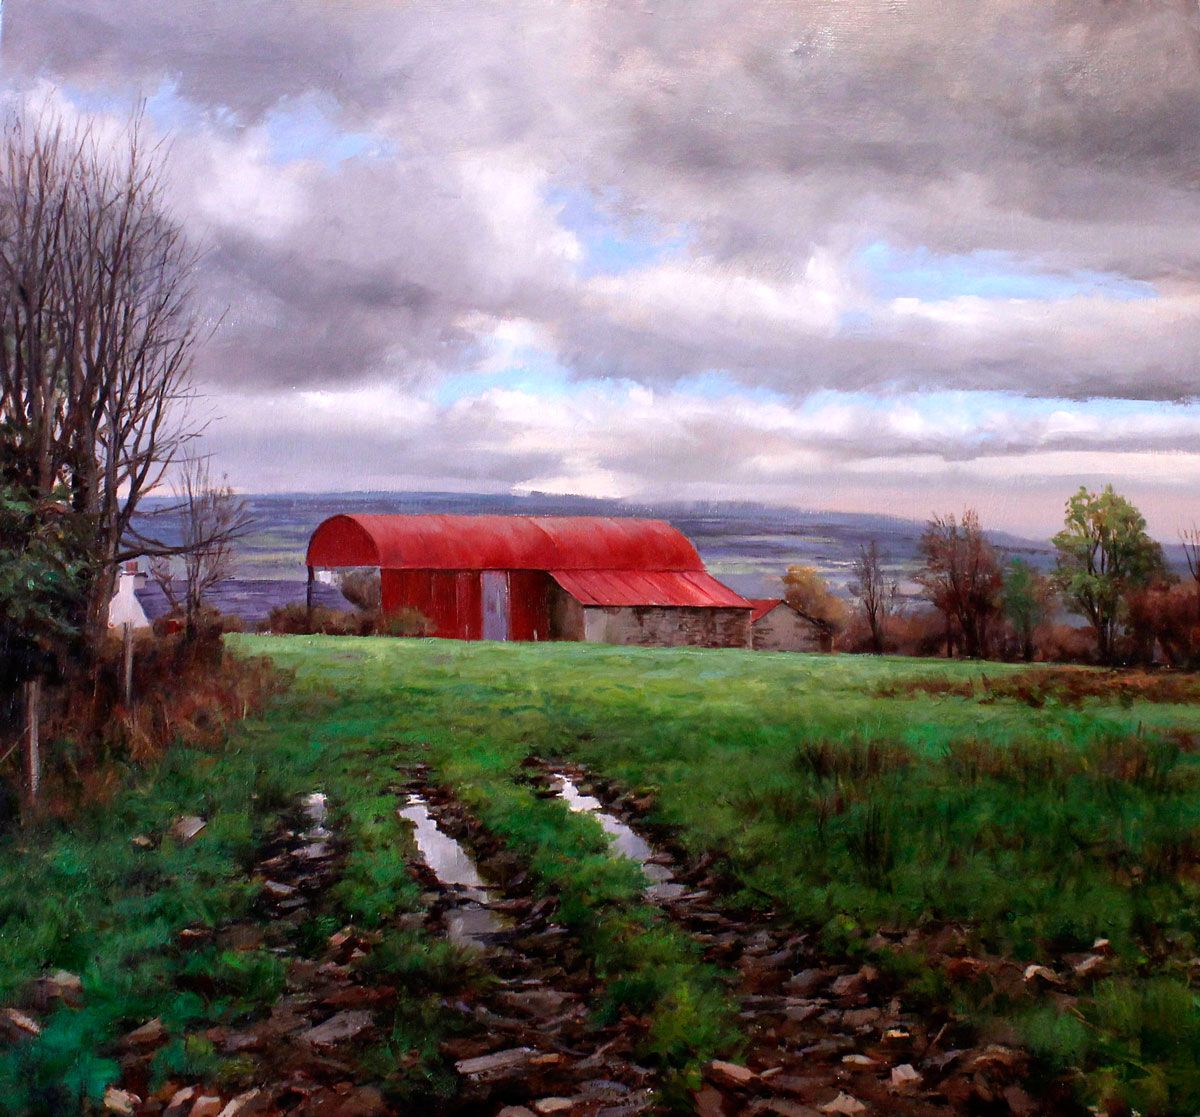 The Red Barnhouse